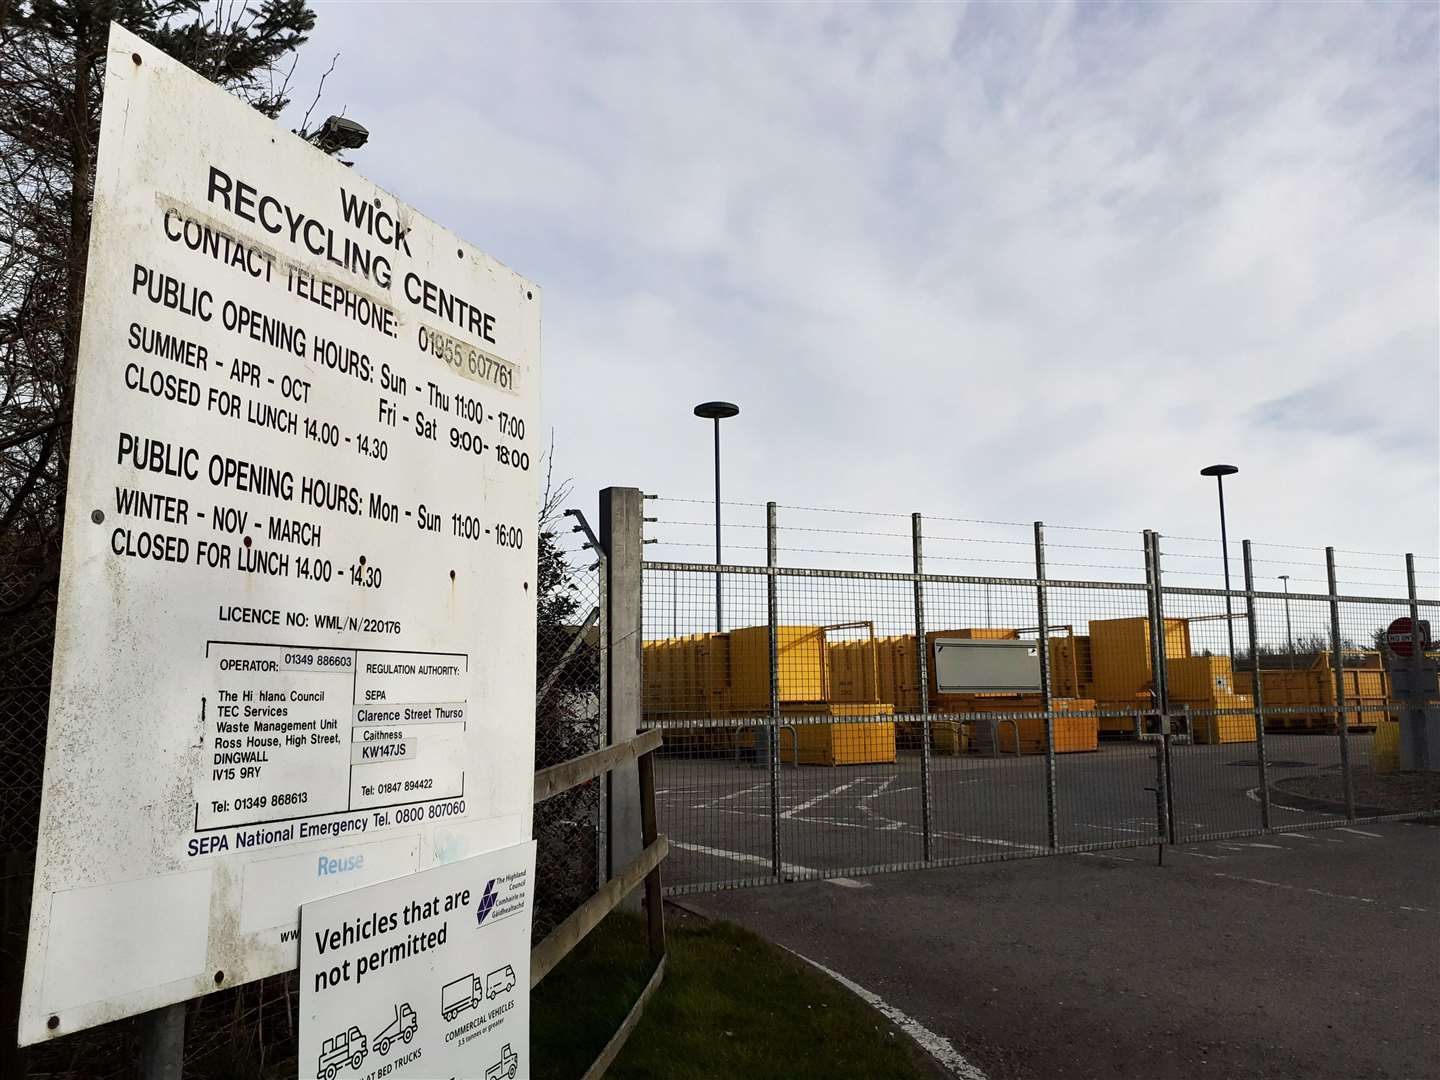 The Highland Council waste recycling centre in Wick is among those across the region that are closed temporarily.